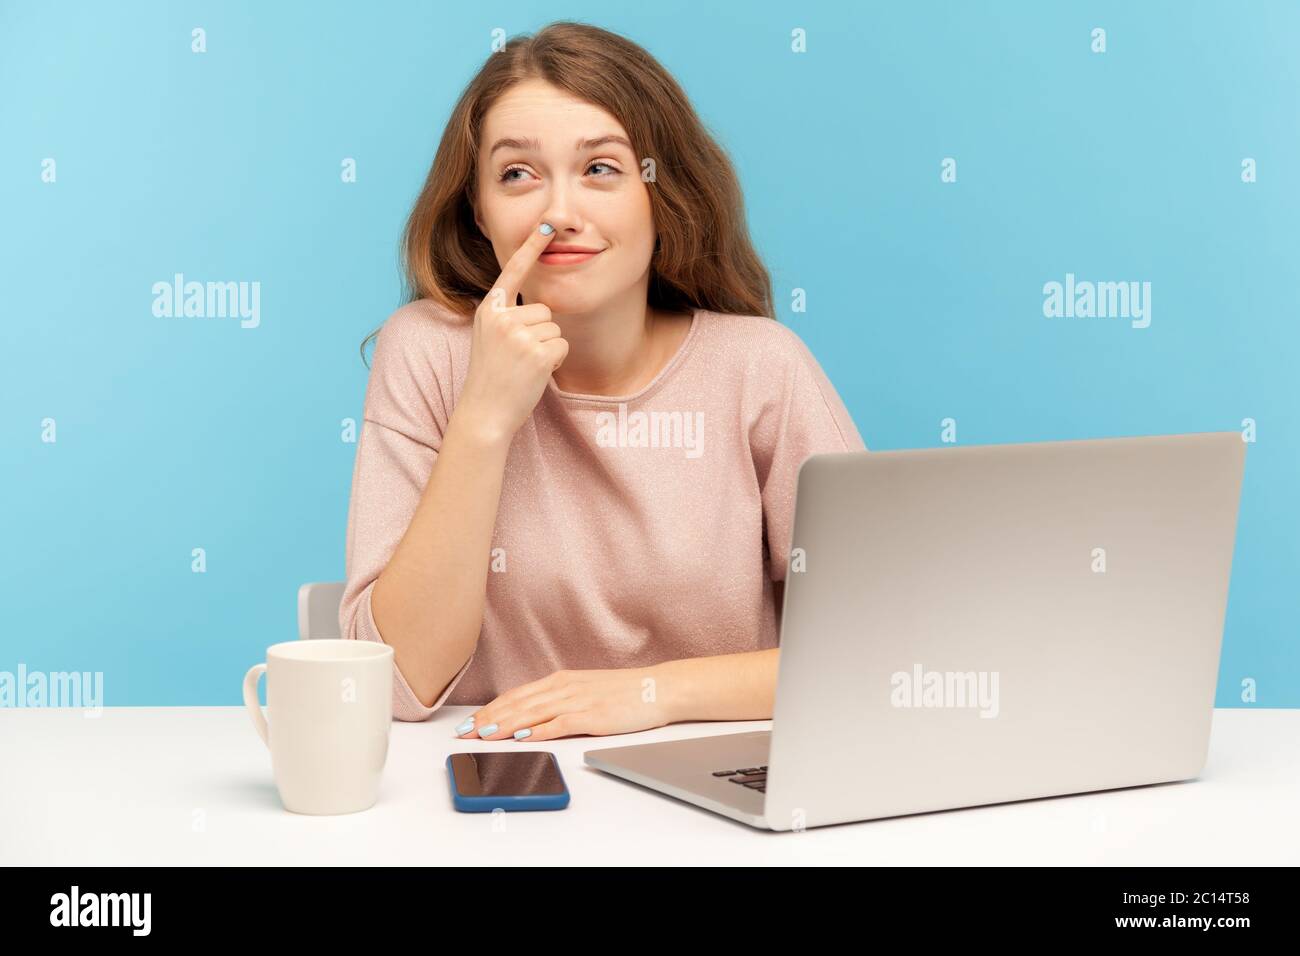 Lazy inefficient woman employee picking nose and looking away with dreamy careless comical expression, having break at workplace, indifferent to her j Stock Photo